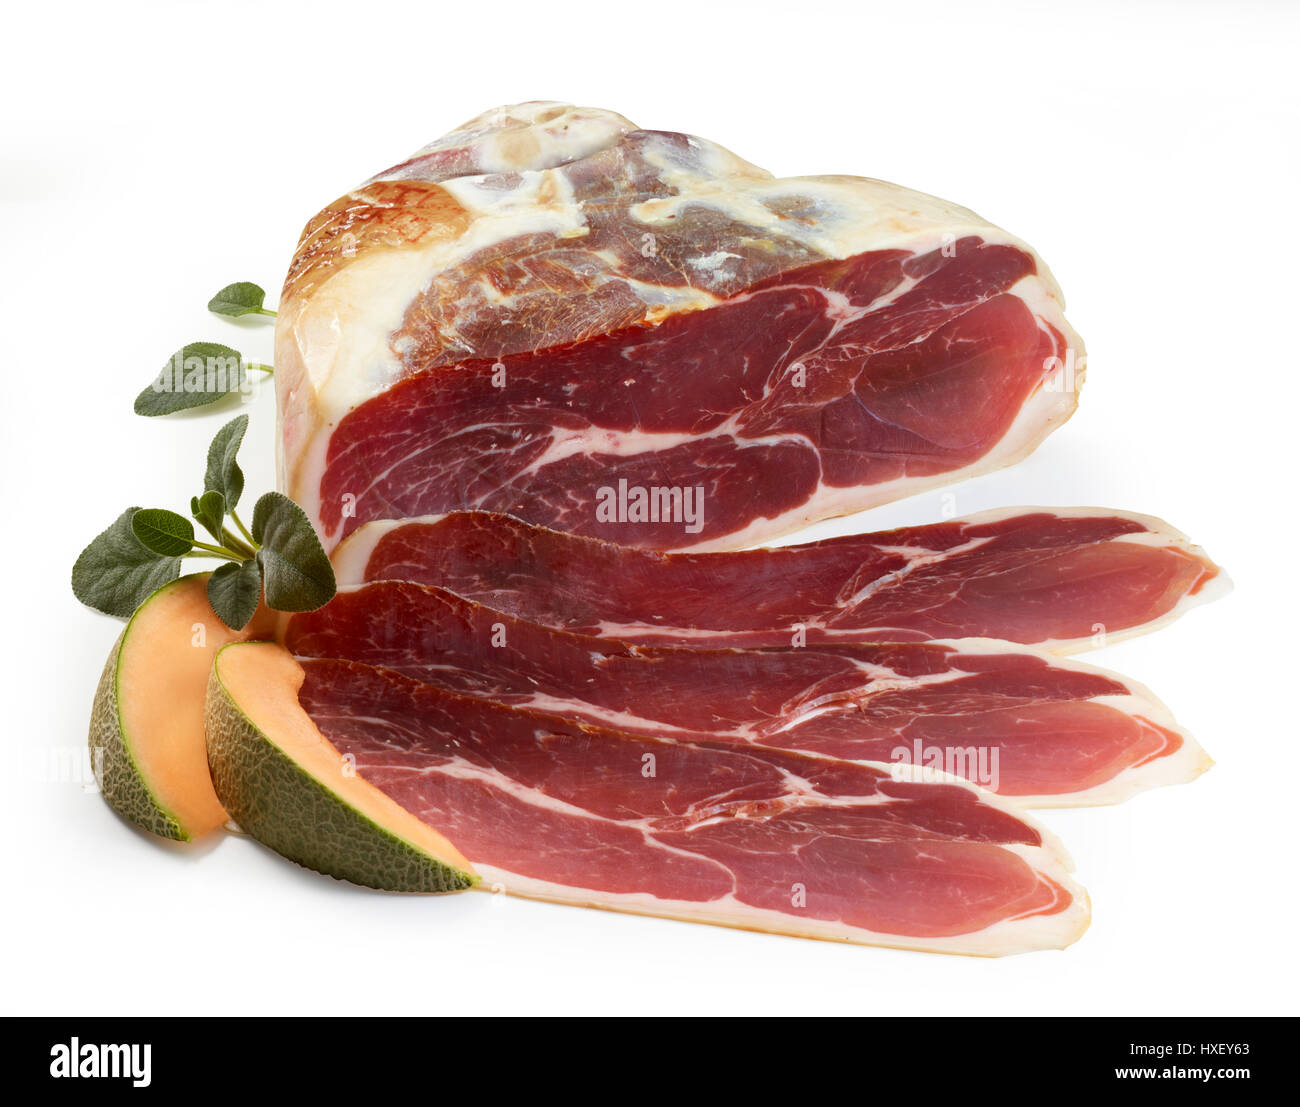 Parma ham with sage (Salvia) and honeydew melon as decoration Stock Photo